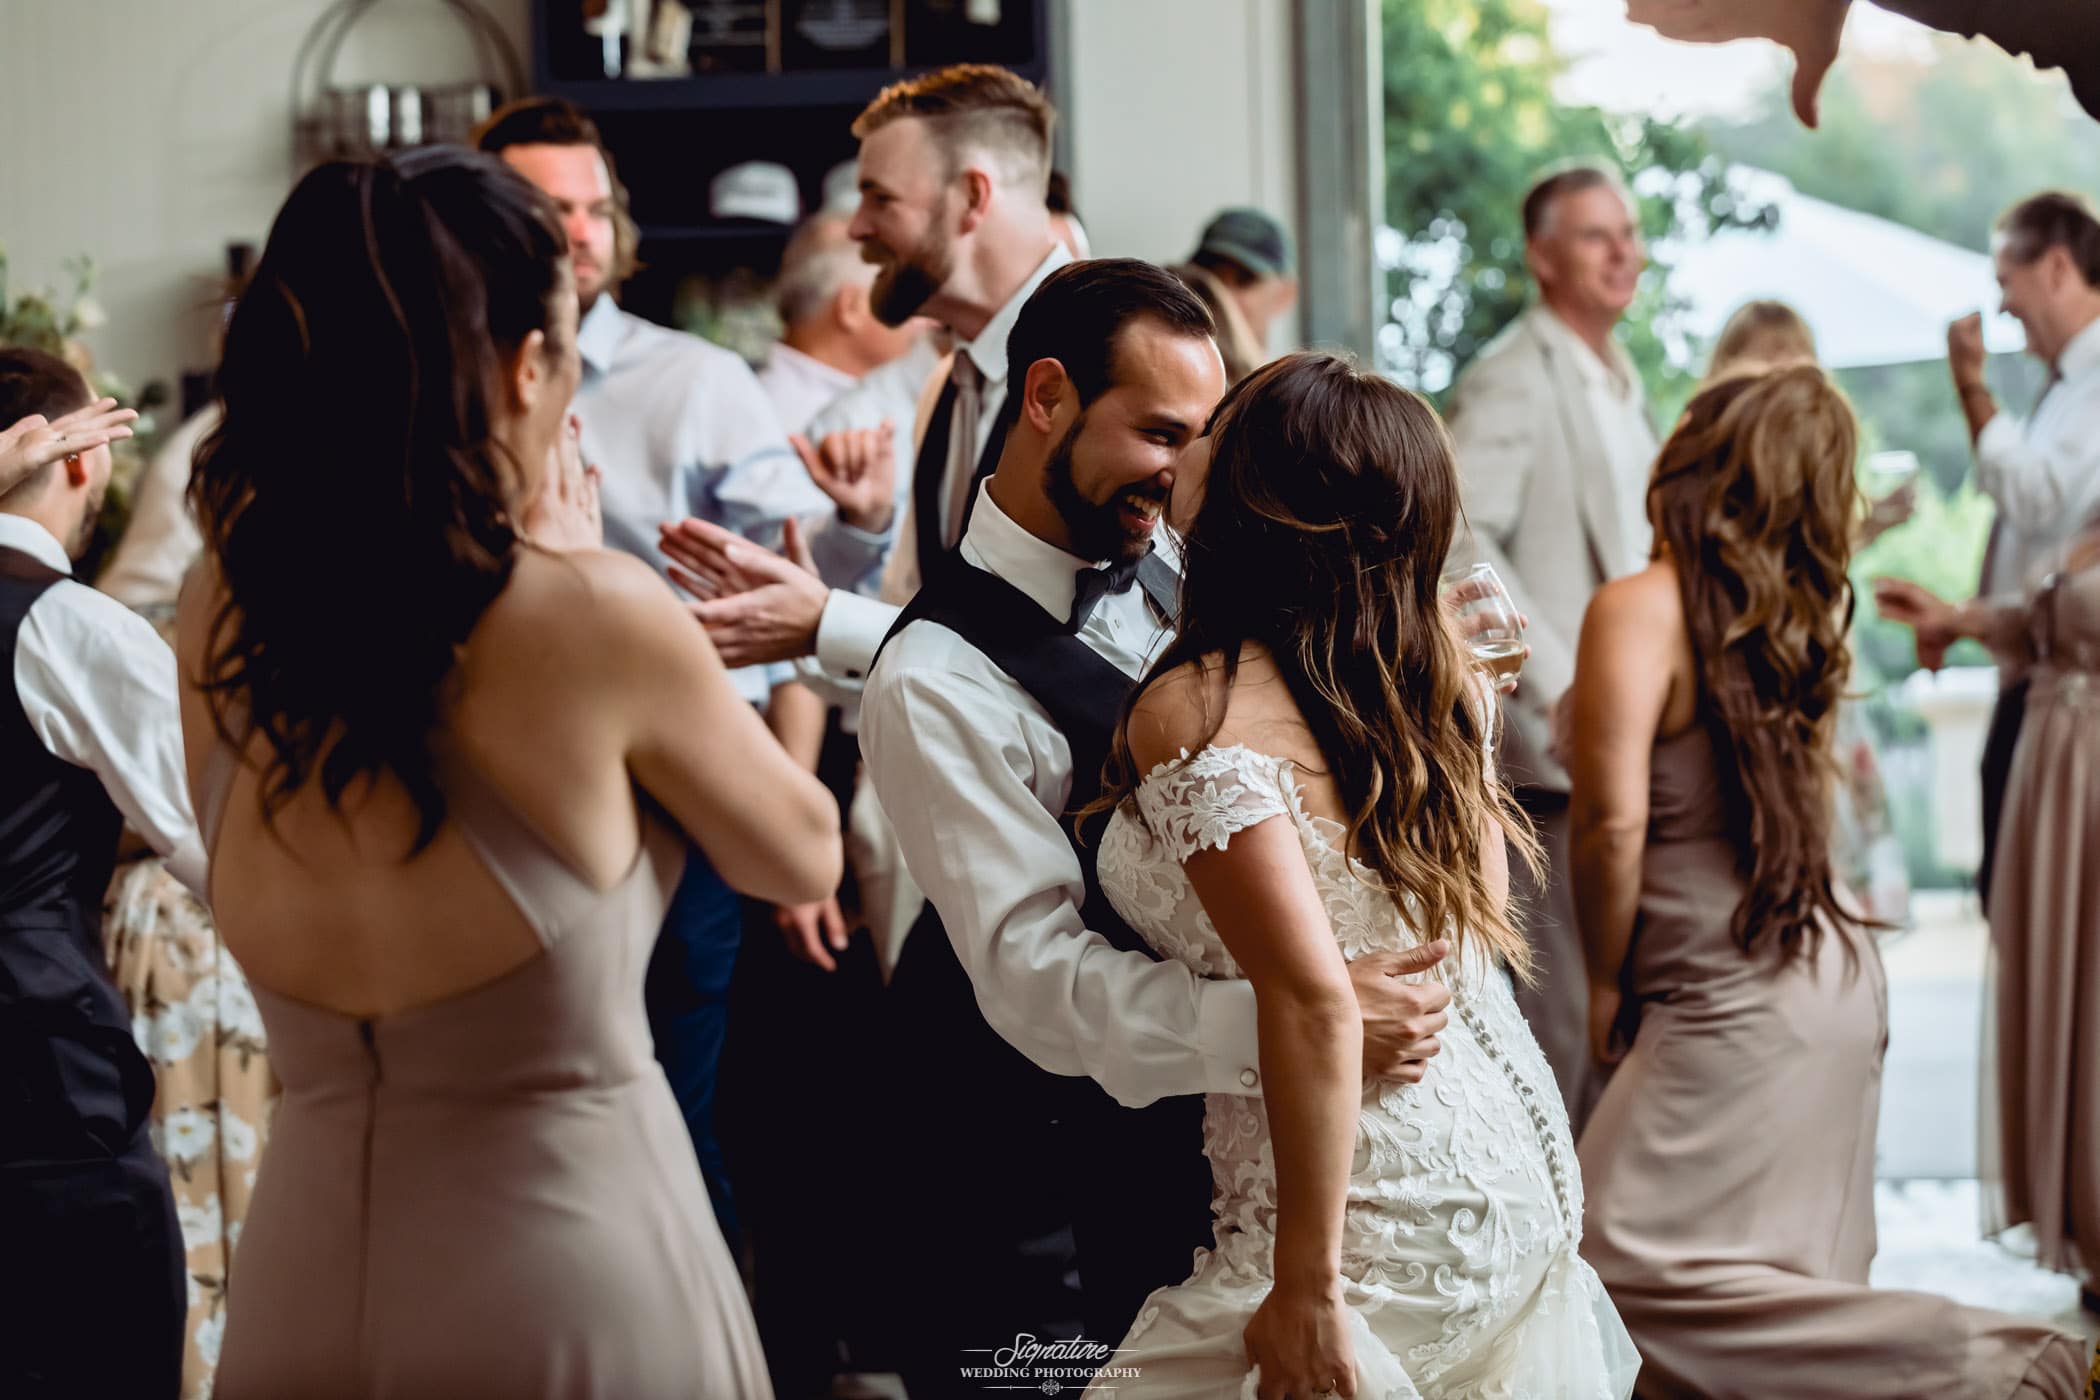 Bride and groom dancing at reception with family